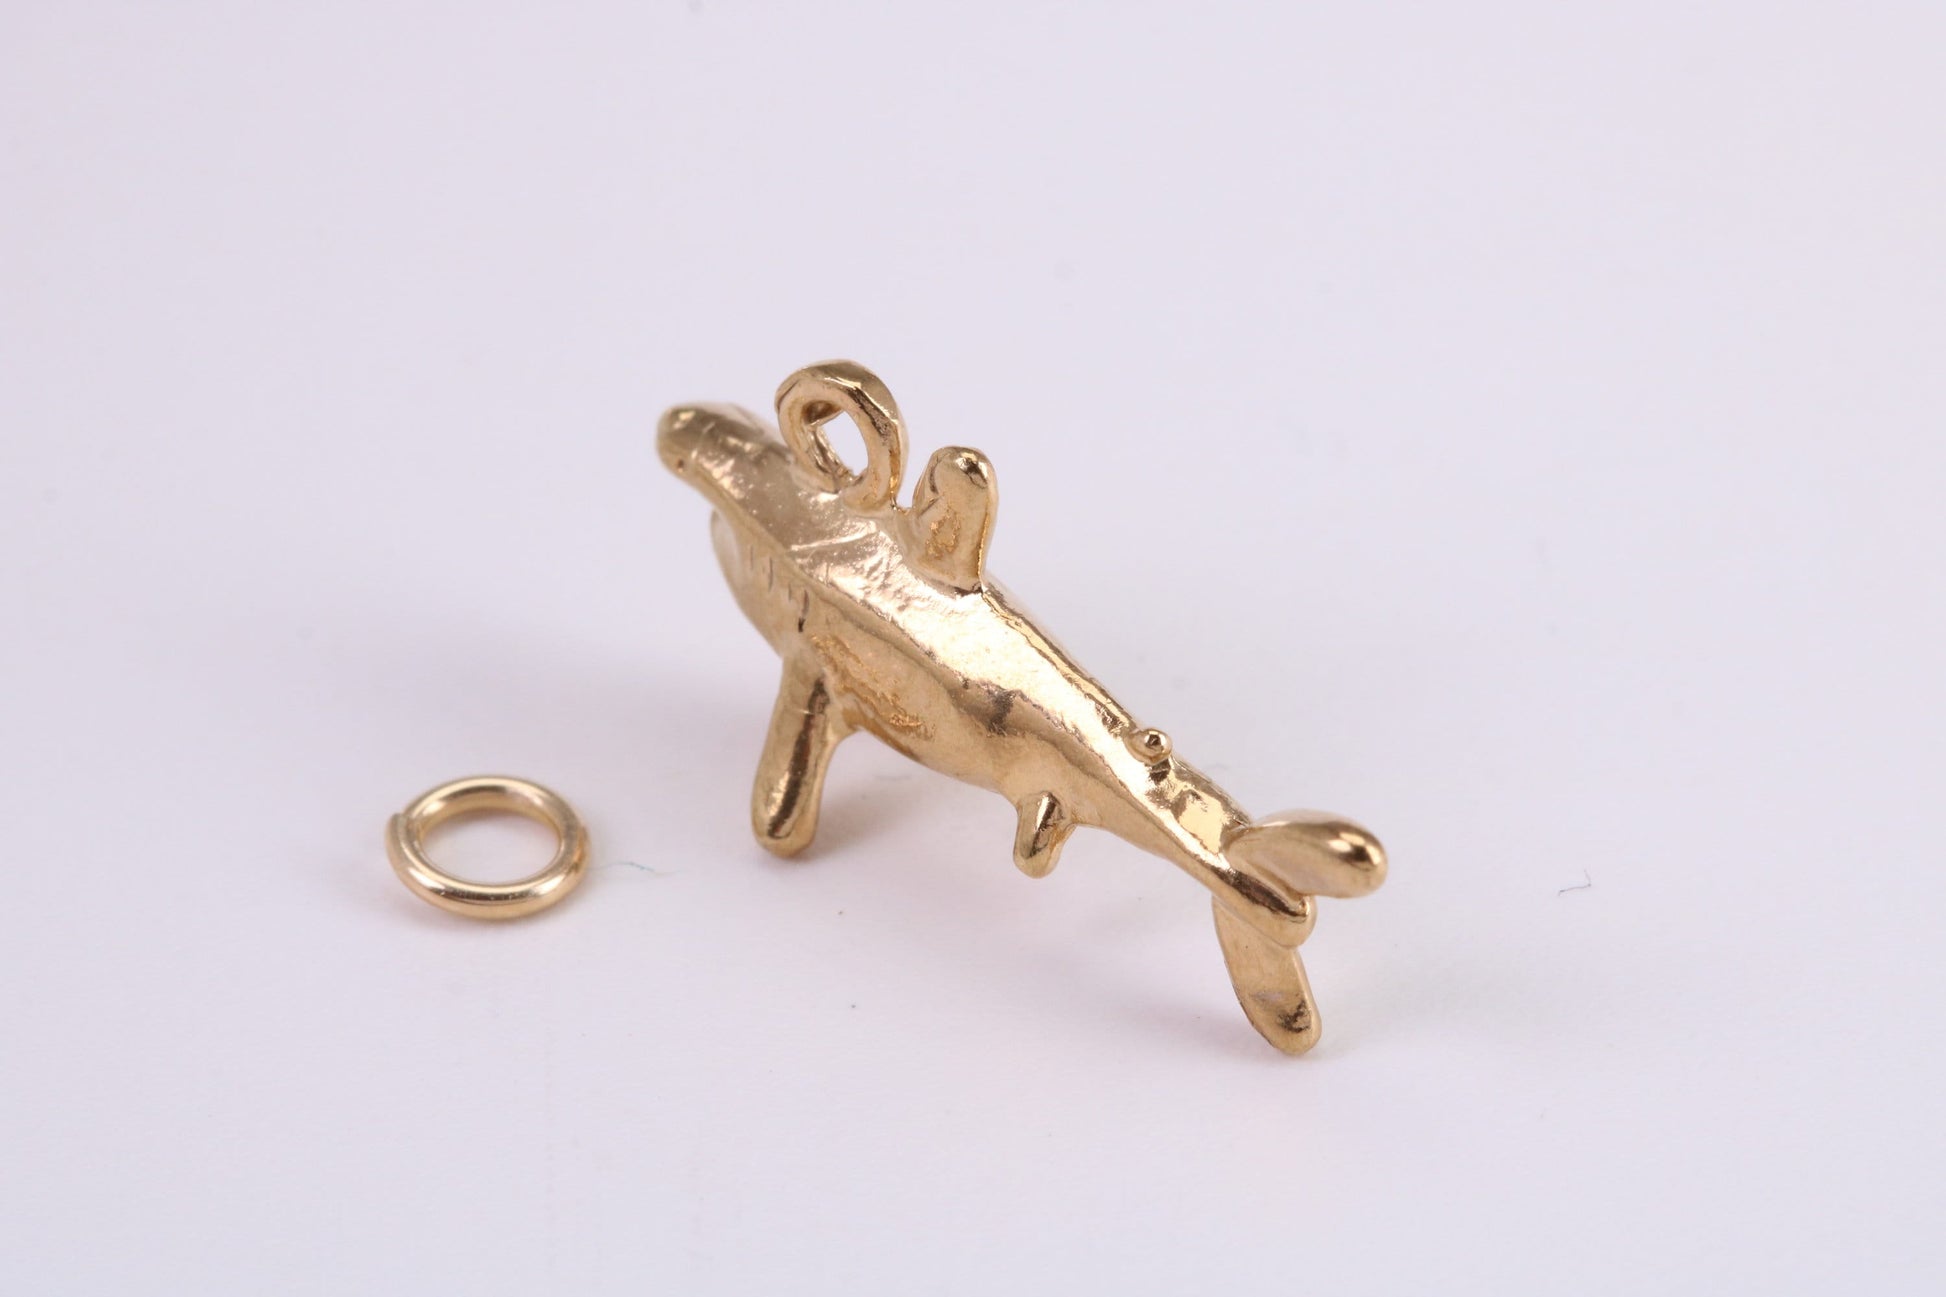 Shark Charm, Traditional Charm, Made from Solid Yellow Gold, British Hallmarked, Complete with Attachment Link